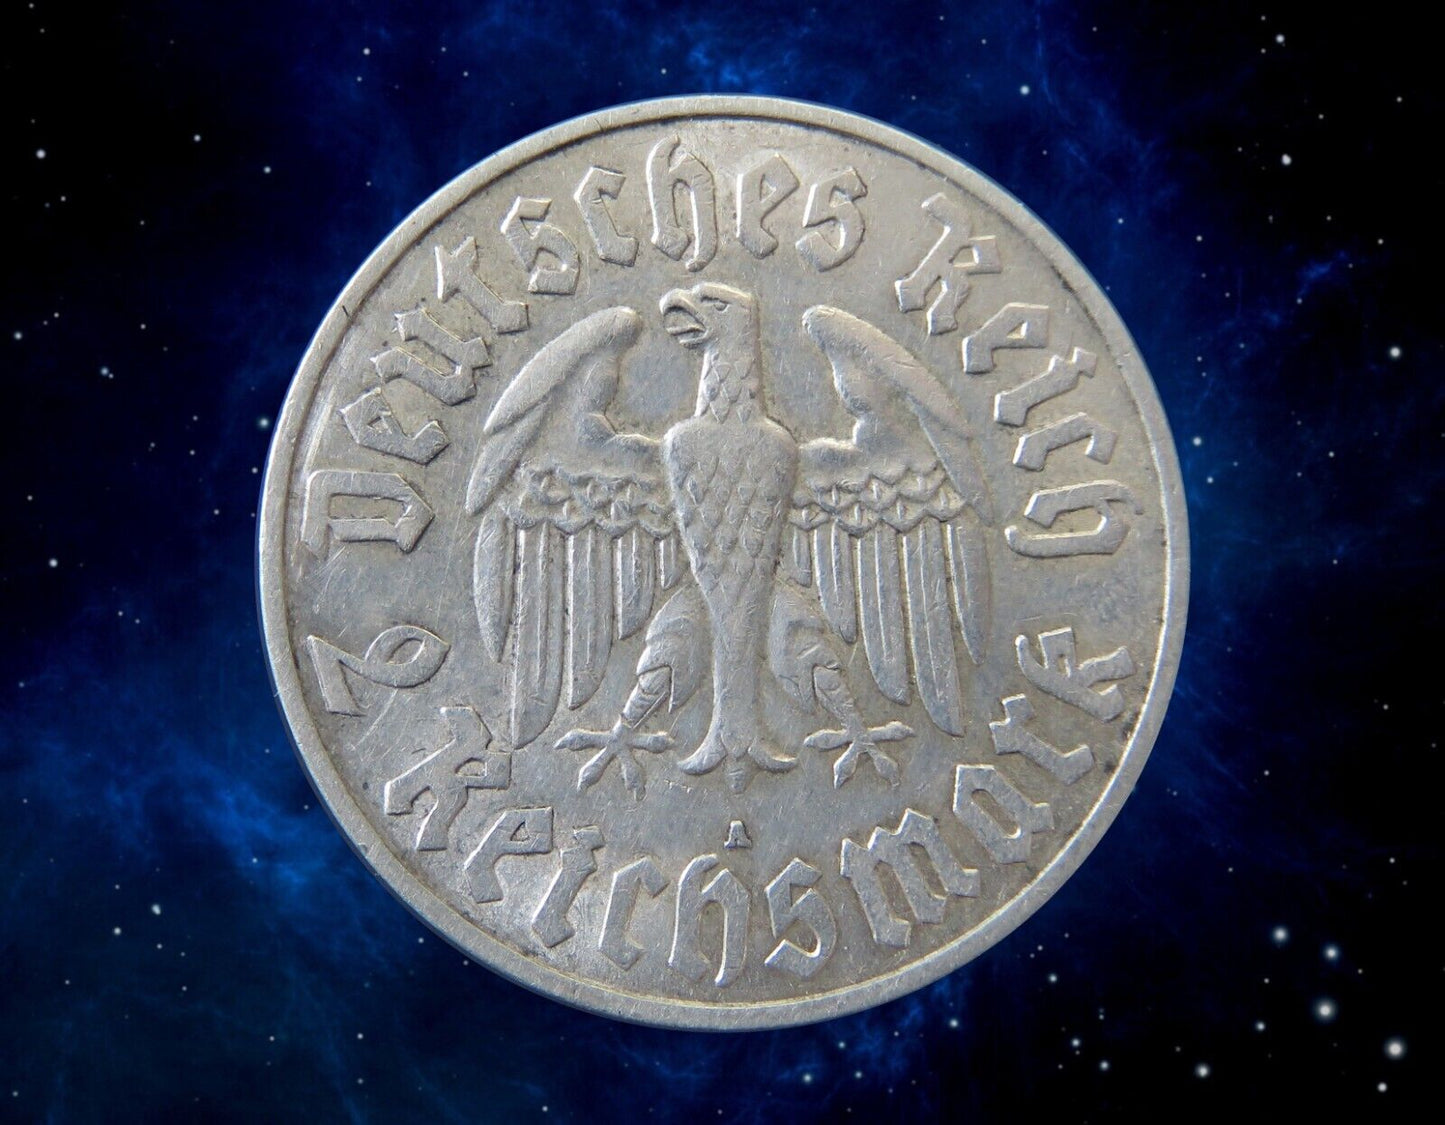 ALLEMAGNE - GERMANY - 2 Reichsmark Martin Luther 1933 Berlin AKS.92